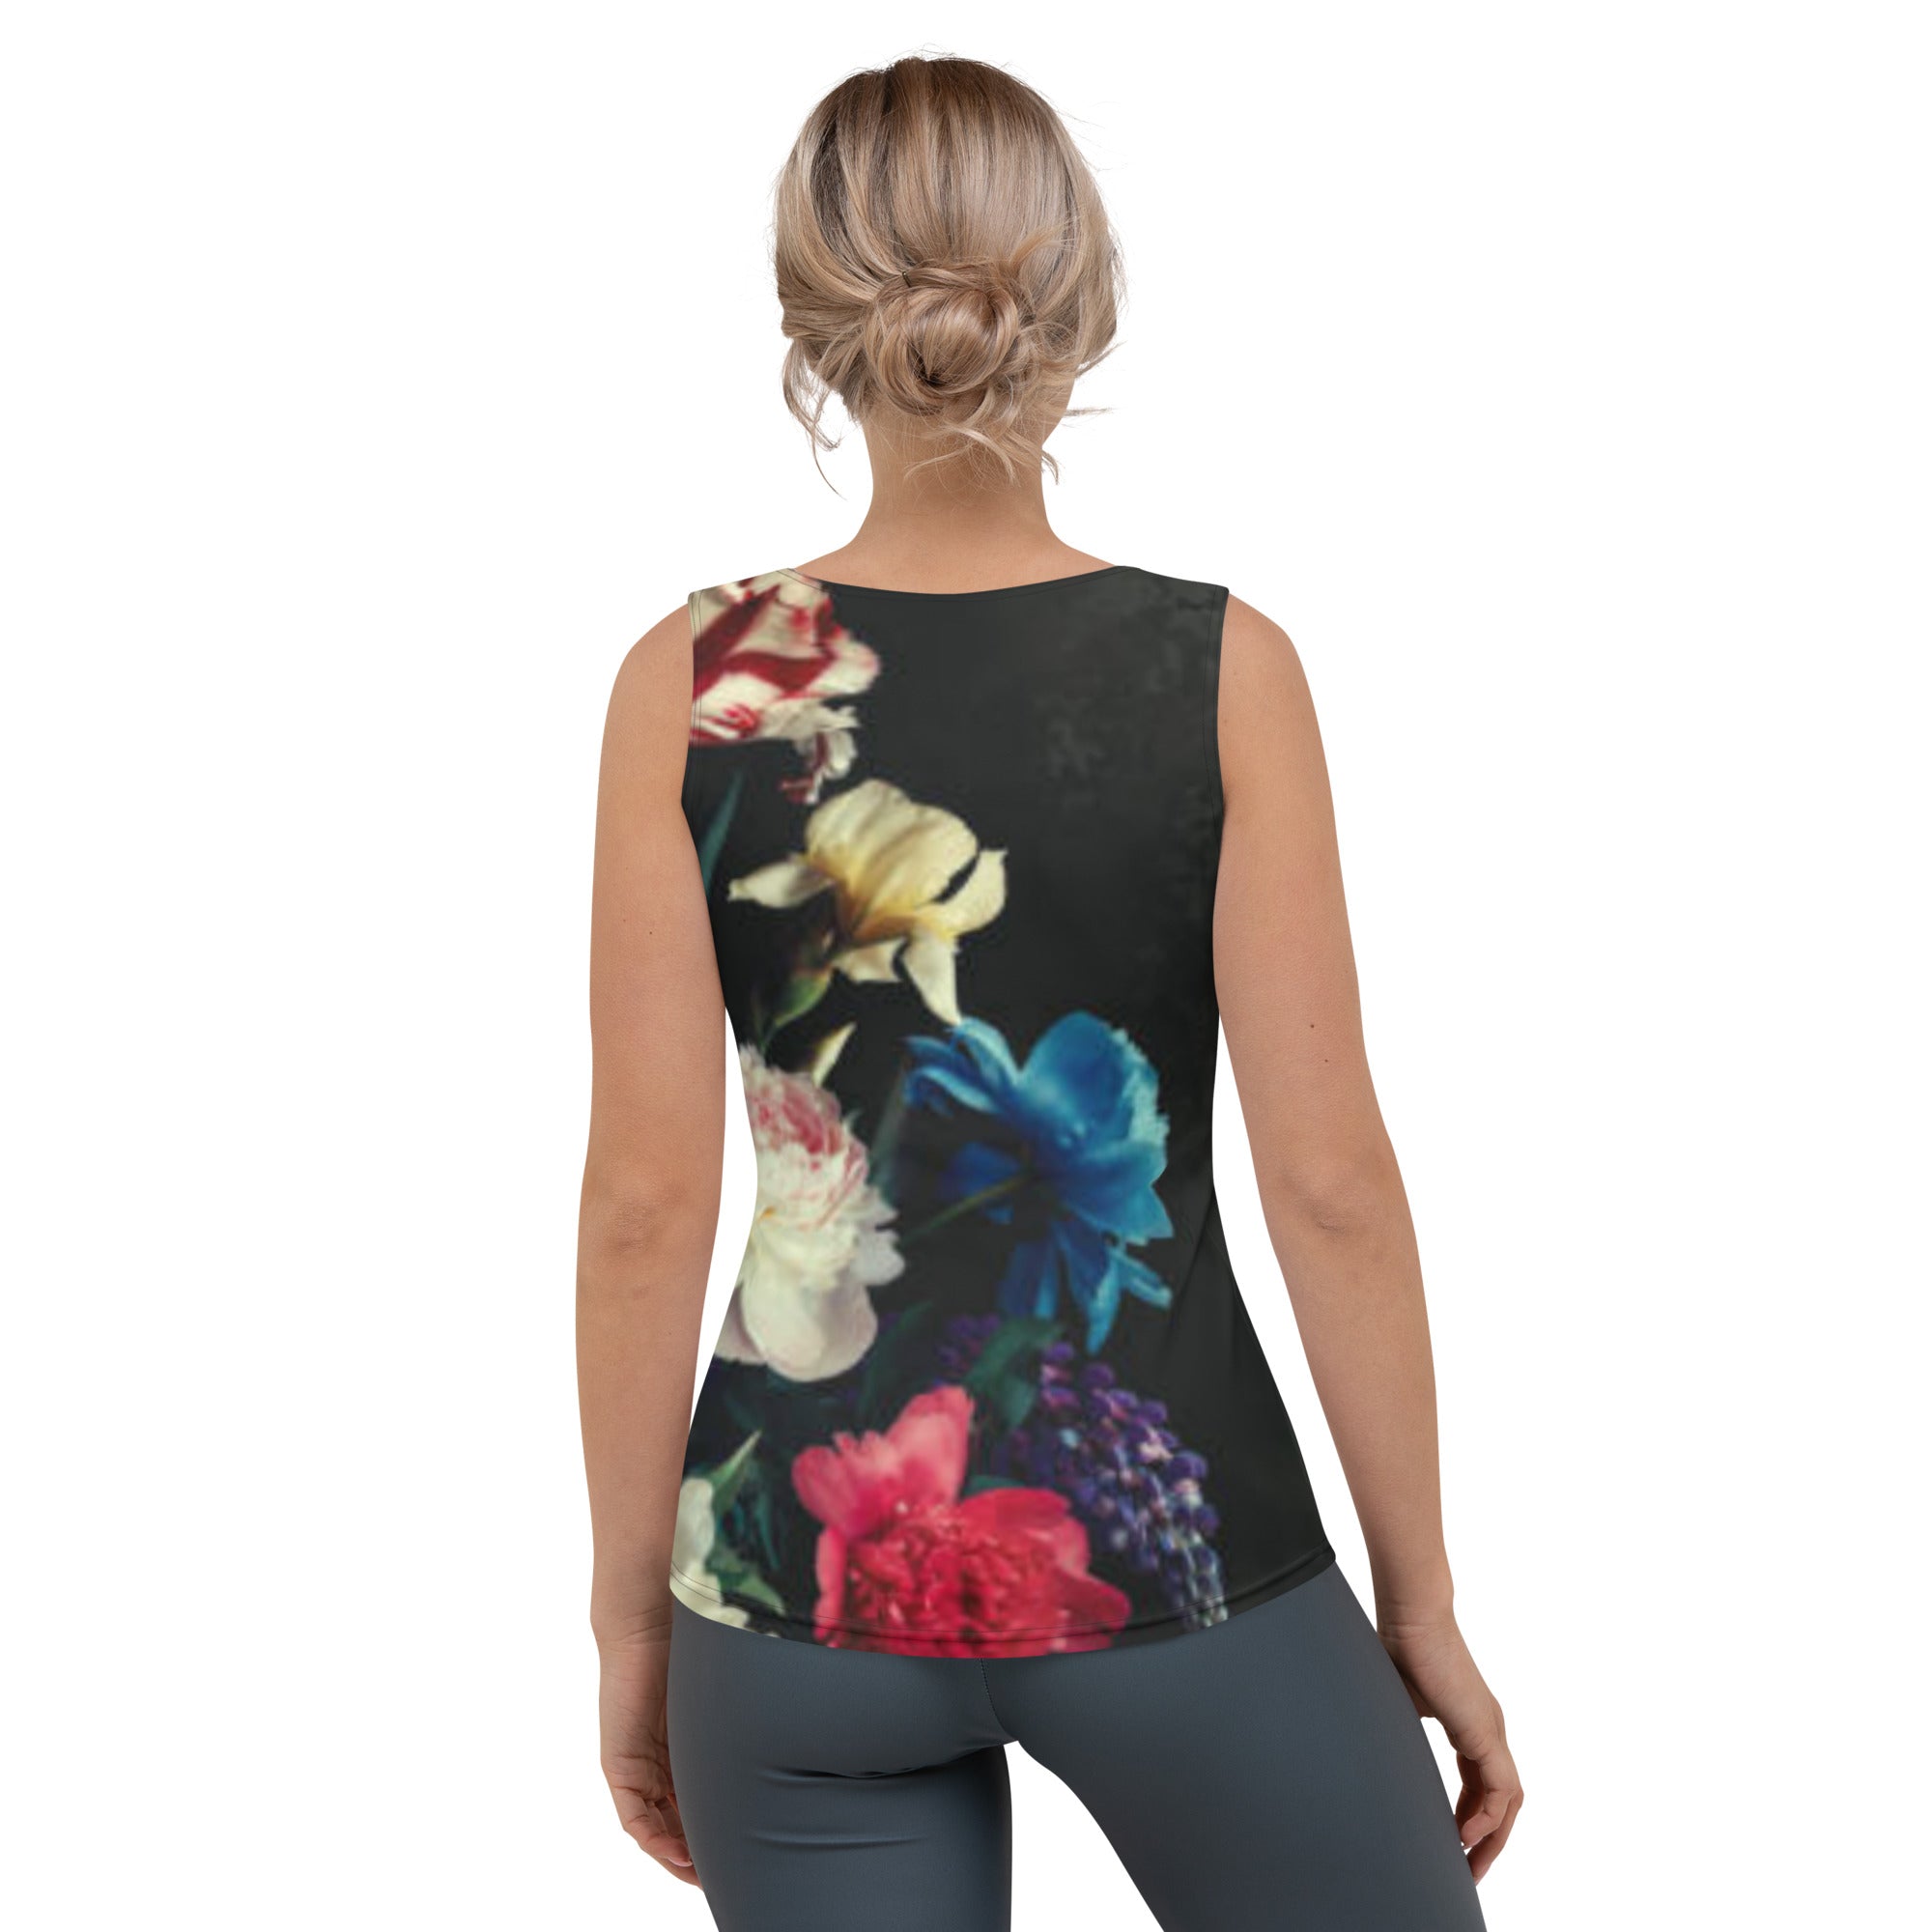 Sublimation Cut & Sew Tank Top runs one size smaller